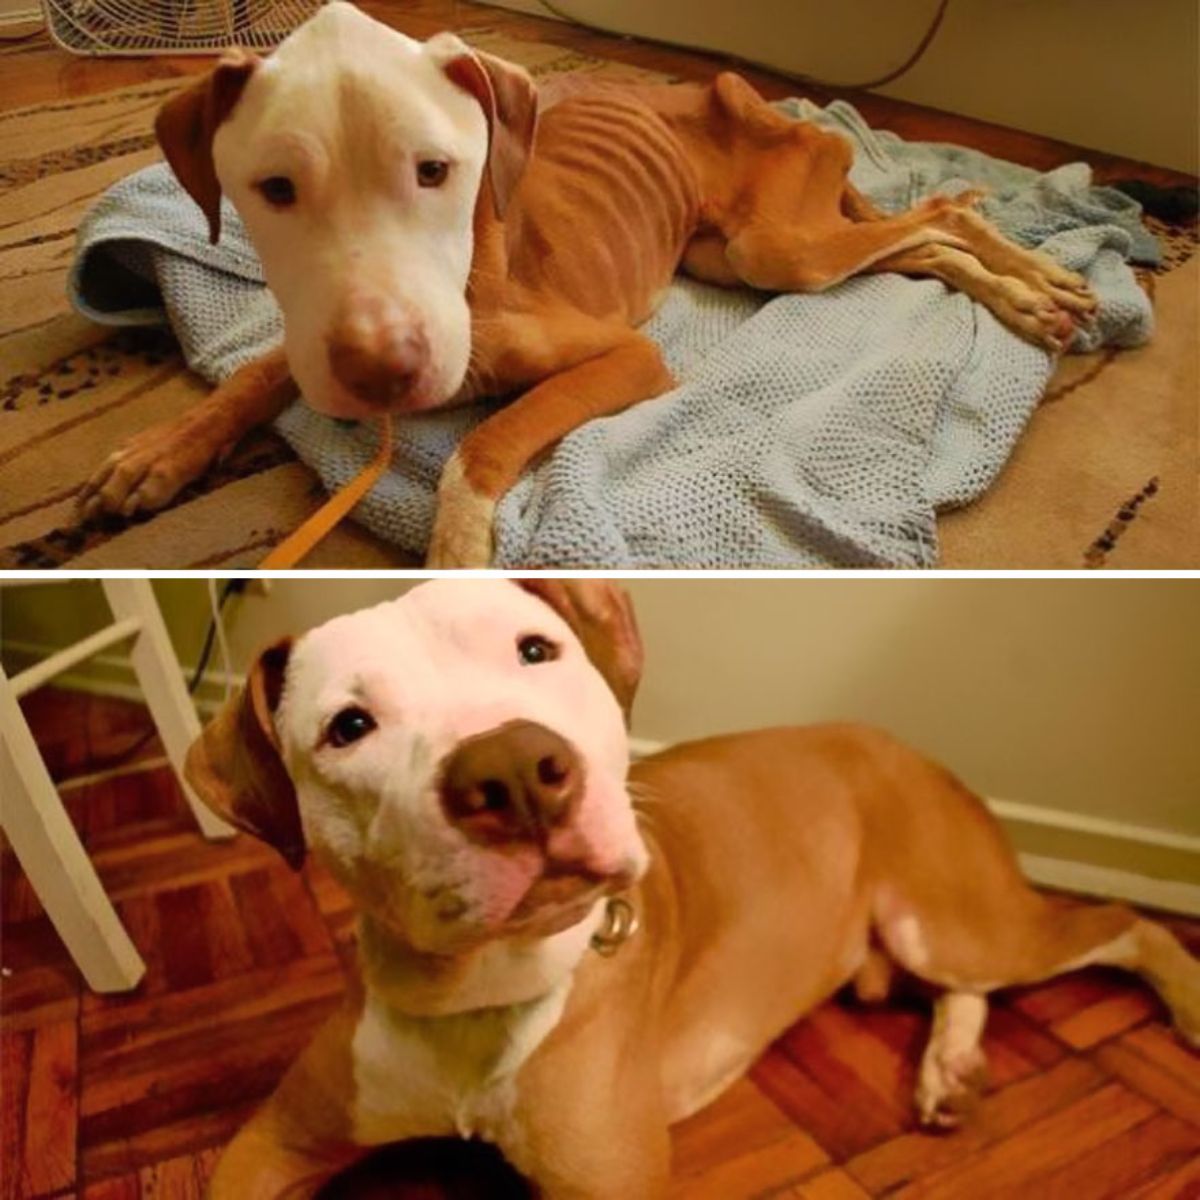 before photo of brown and white pitbull with ribs showing and after photo of happy brown and white pitbull